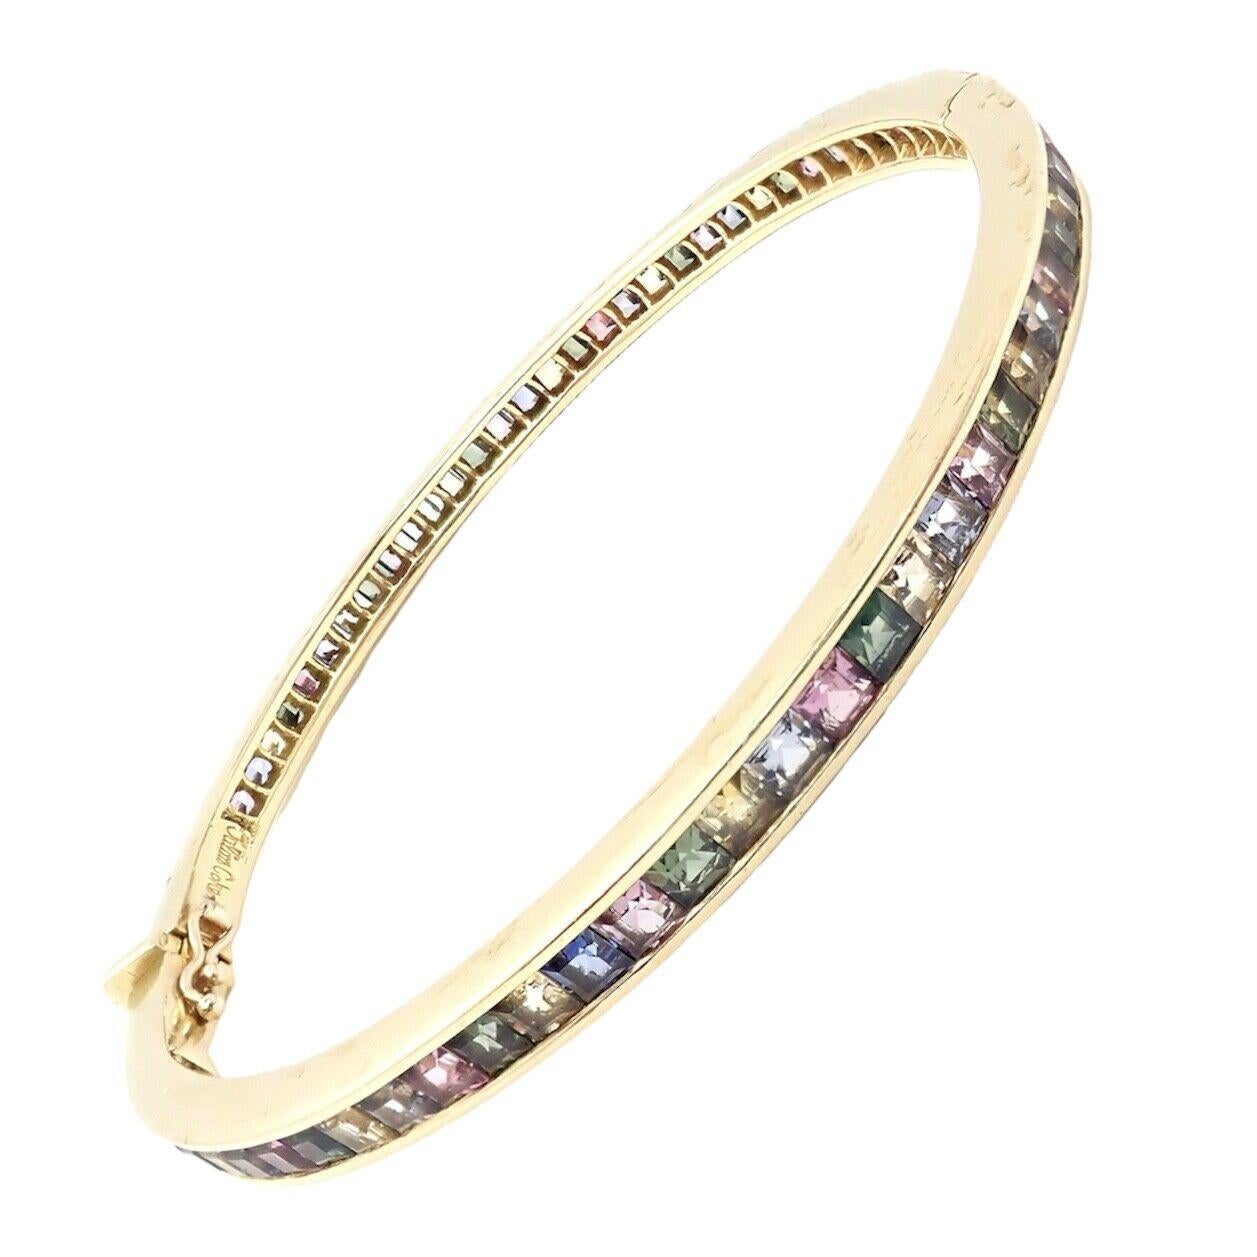 18k Yellow Gold Sapphire & Other Pastel Color Stone Bangle Bracelet by Julius Cohen.
Stones Include: Spinels, Iolites, Sapphires, and More.
Details: 
Size: 6.75